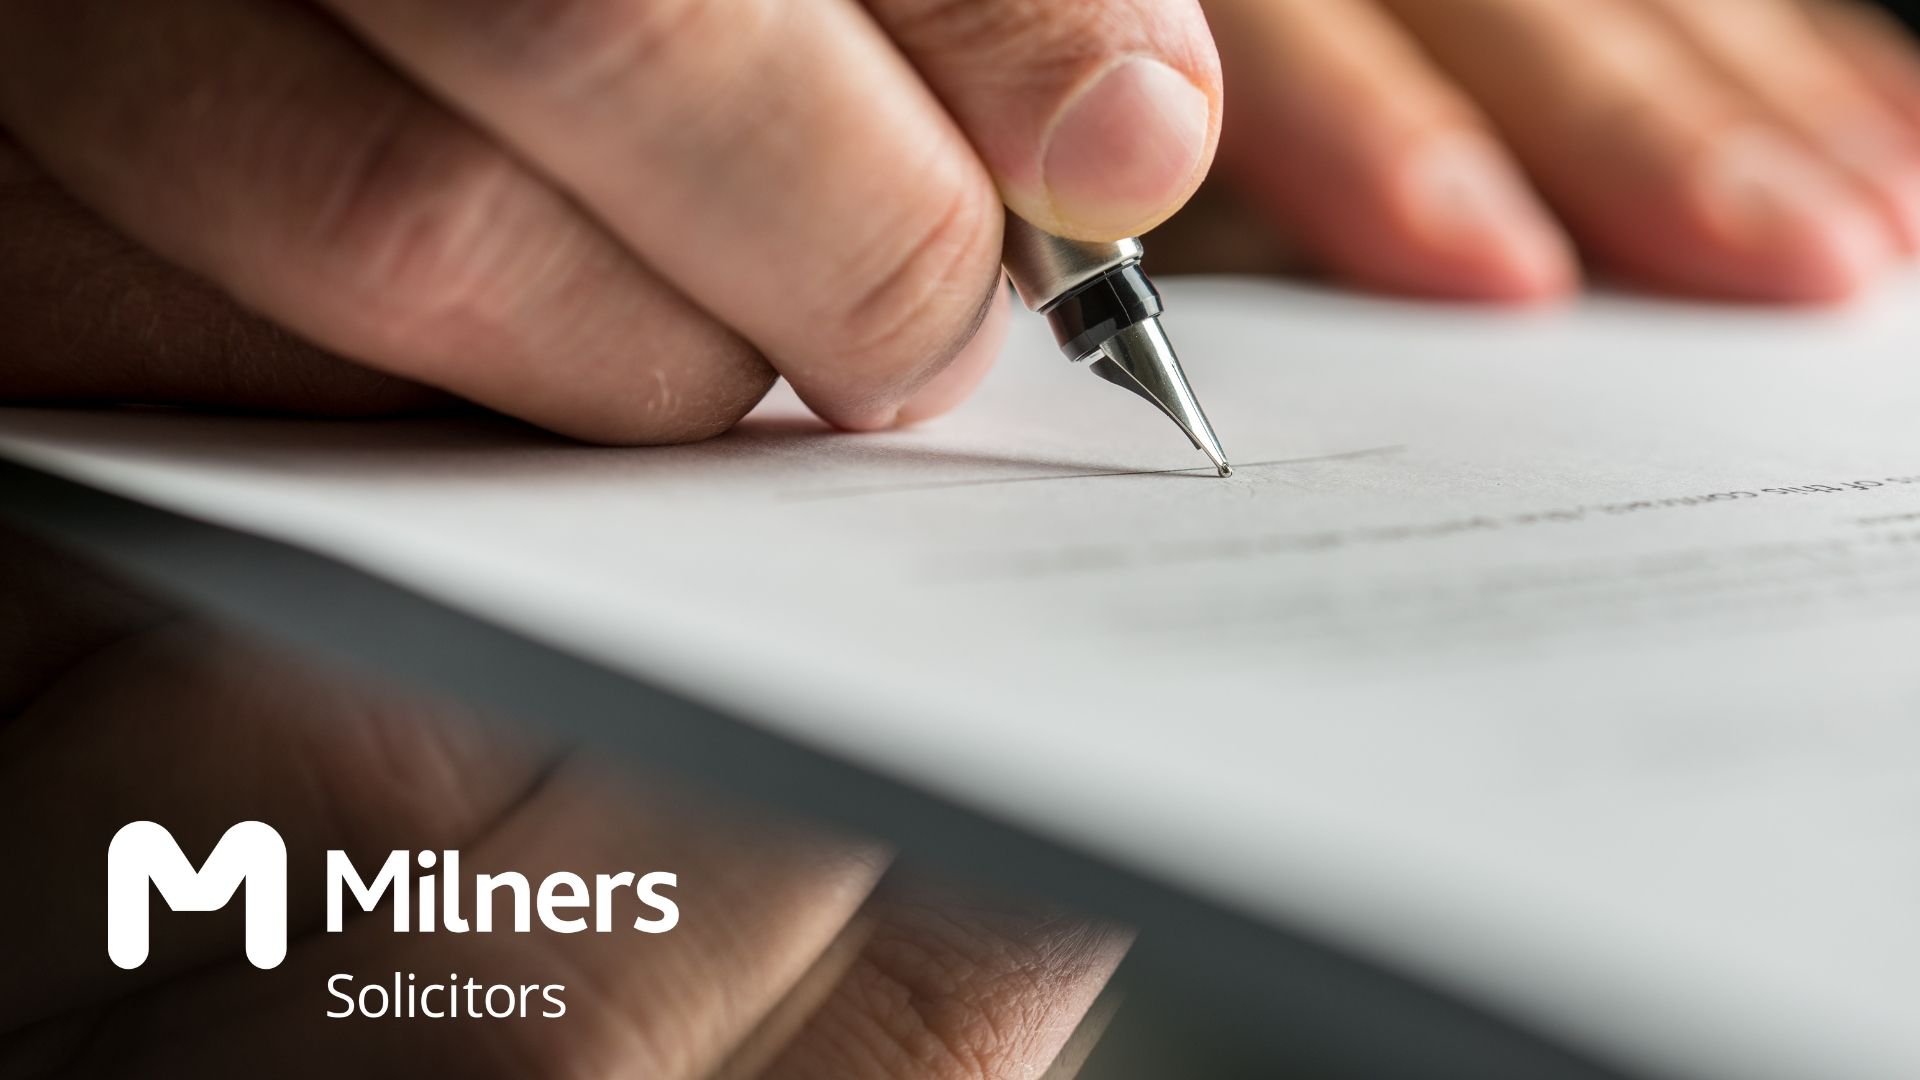 If you don't write a will, the law decides how your estate is distributed. So when is the right time to put pen to paper? Find out in our 5-minute read.
